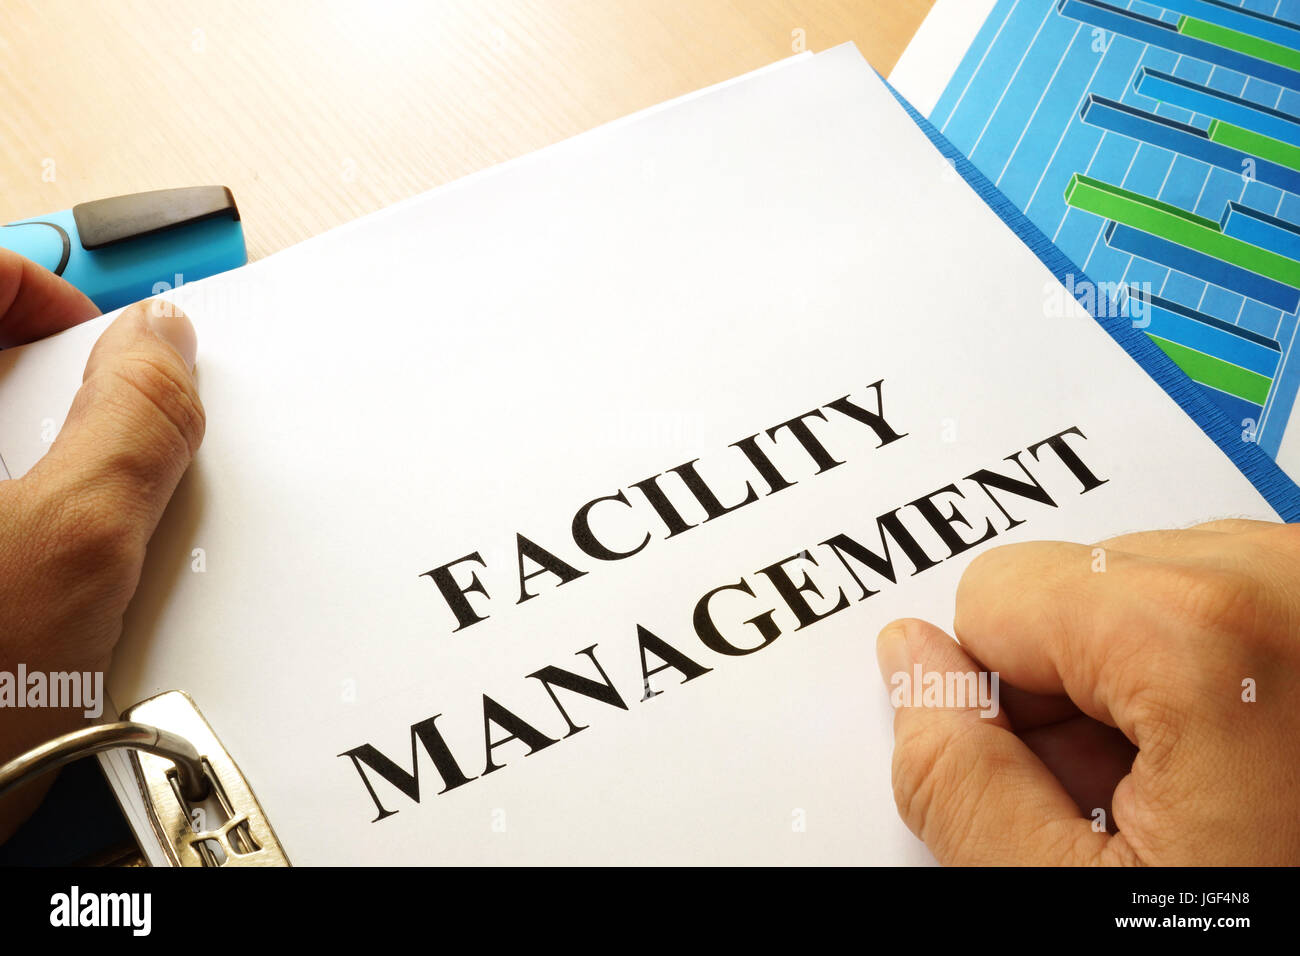 Folder with title Facility Management. Stock Photo